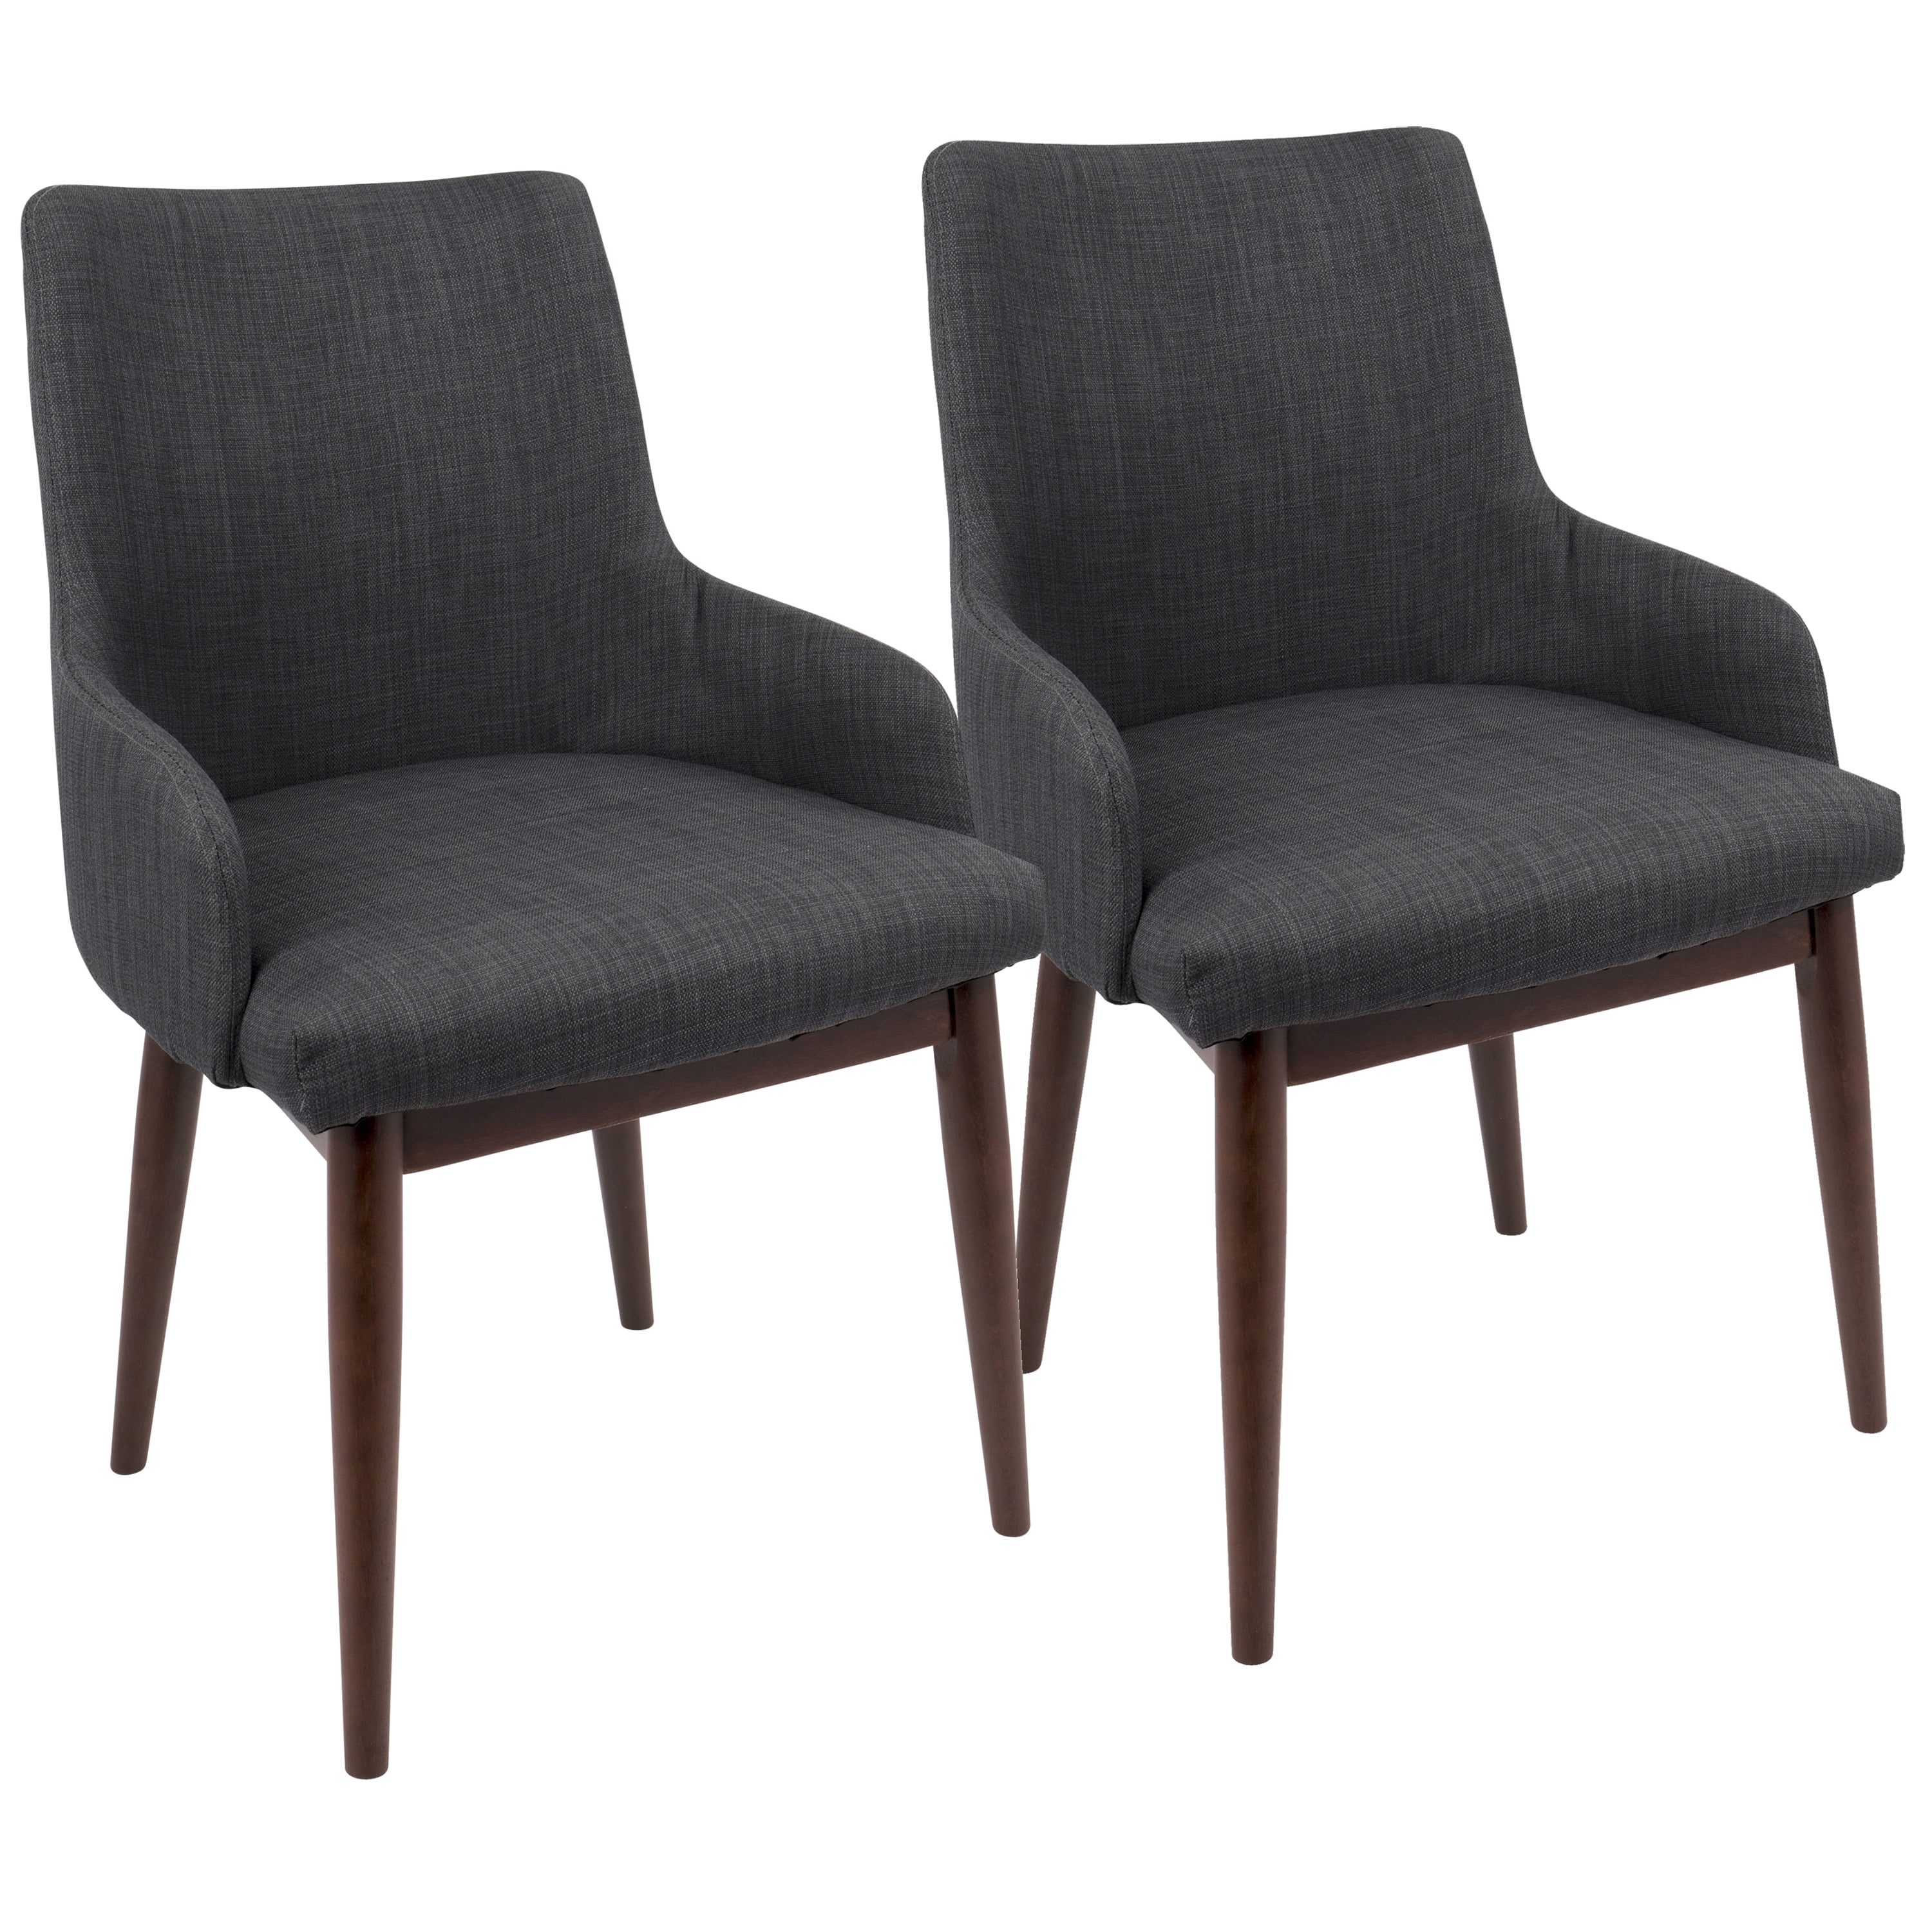 Santiago Mid Century Modern Dining Accent Chair Charcoal Fabric Upholstery By Lumisource Set Of 2 Walmart Com Walmart Com,2 Kids Bedroom Ideas For Small Rooms